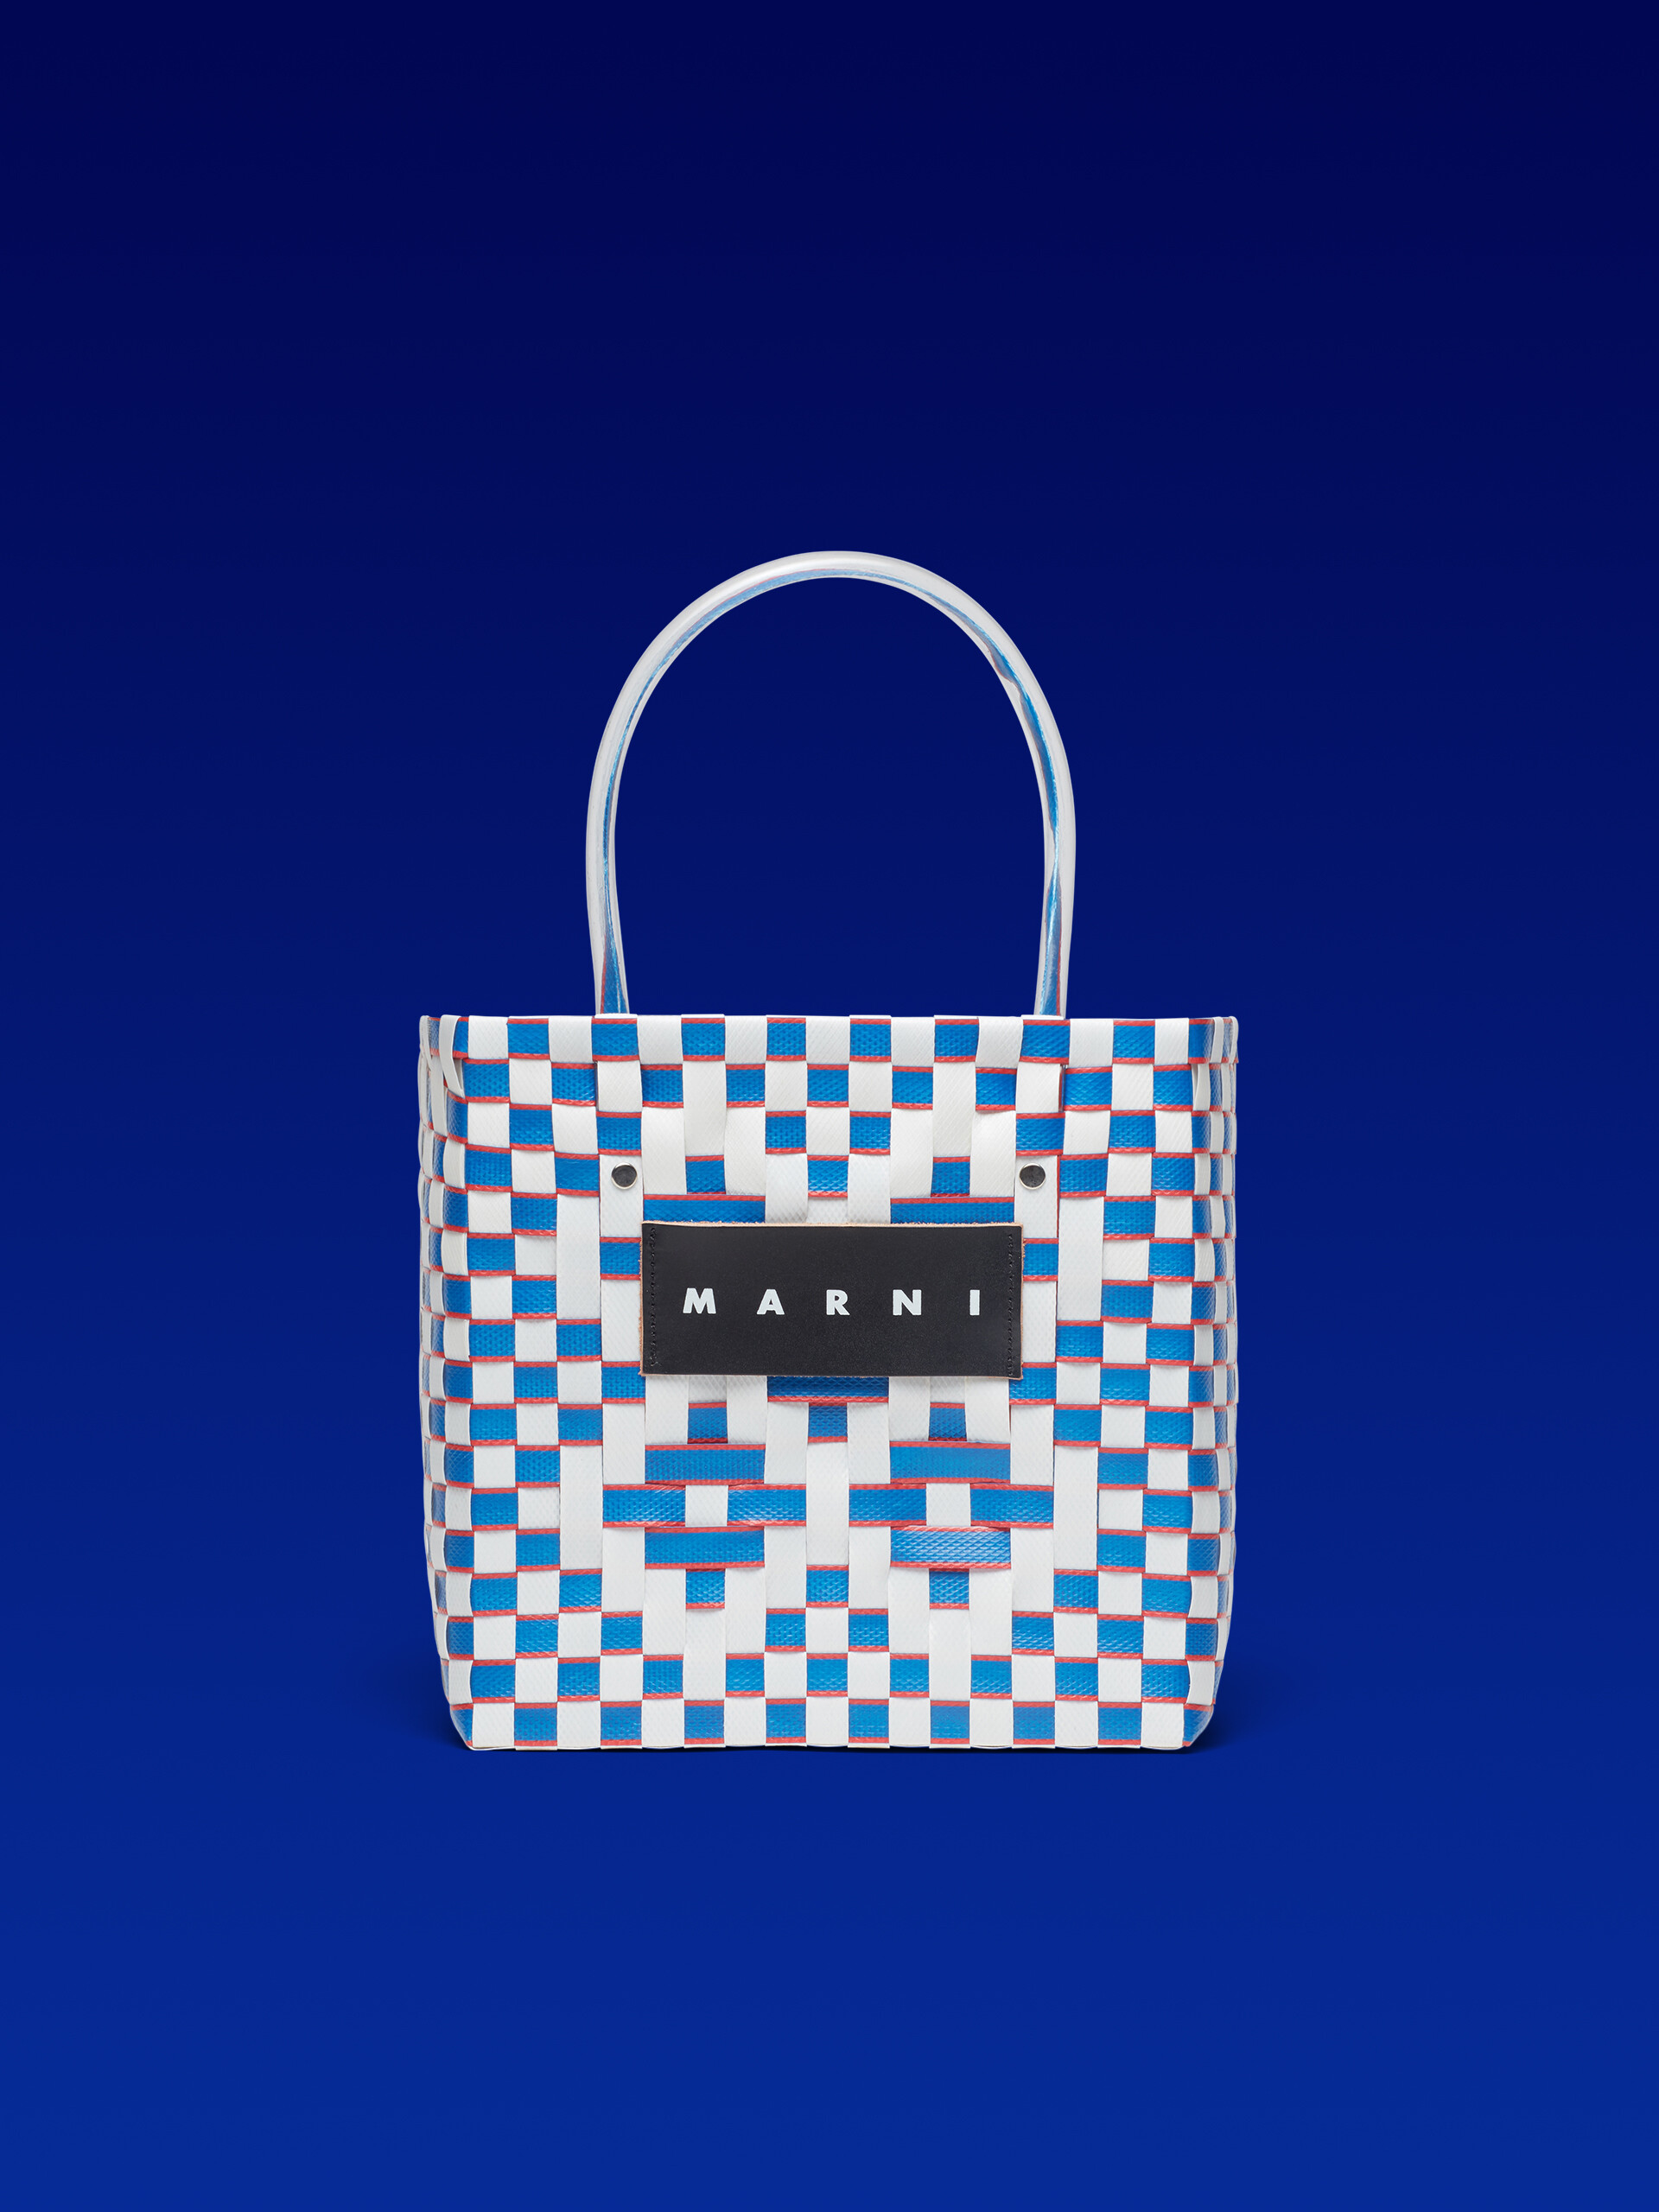 MARNI MARKET BASKET bag in white and pale blue woven material - Bags - Image 1